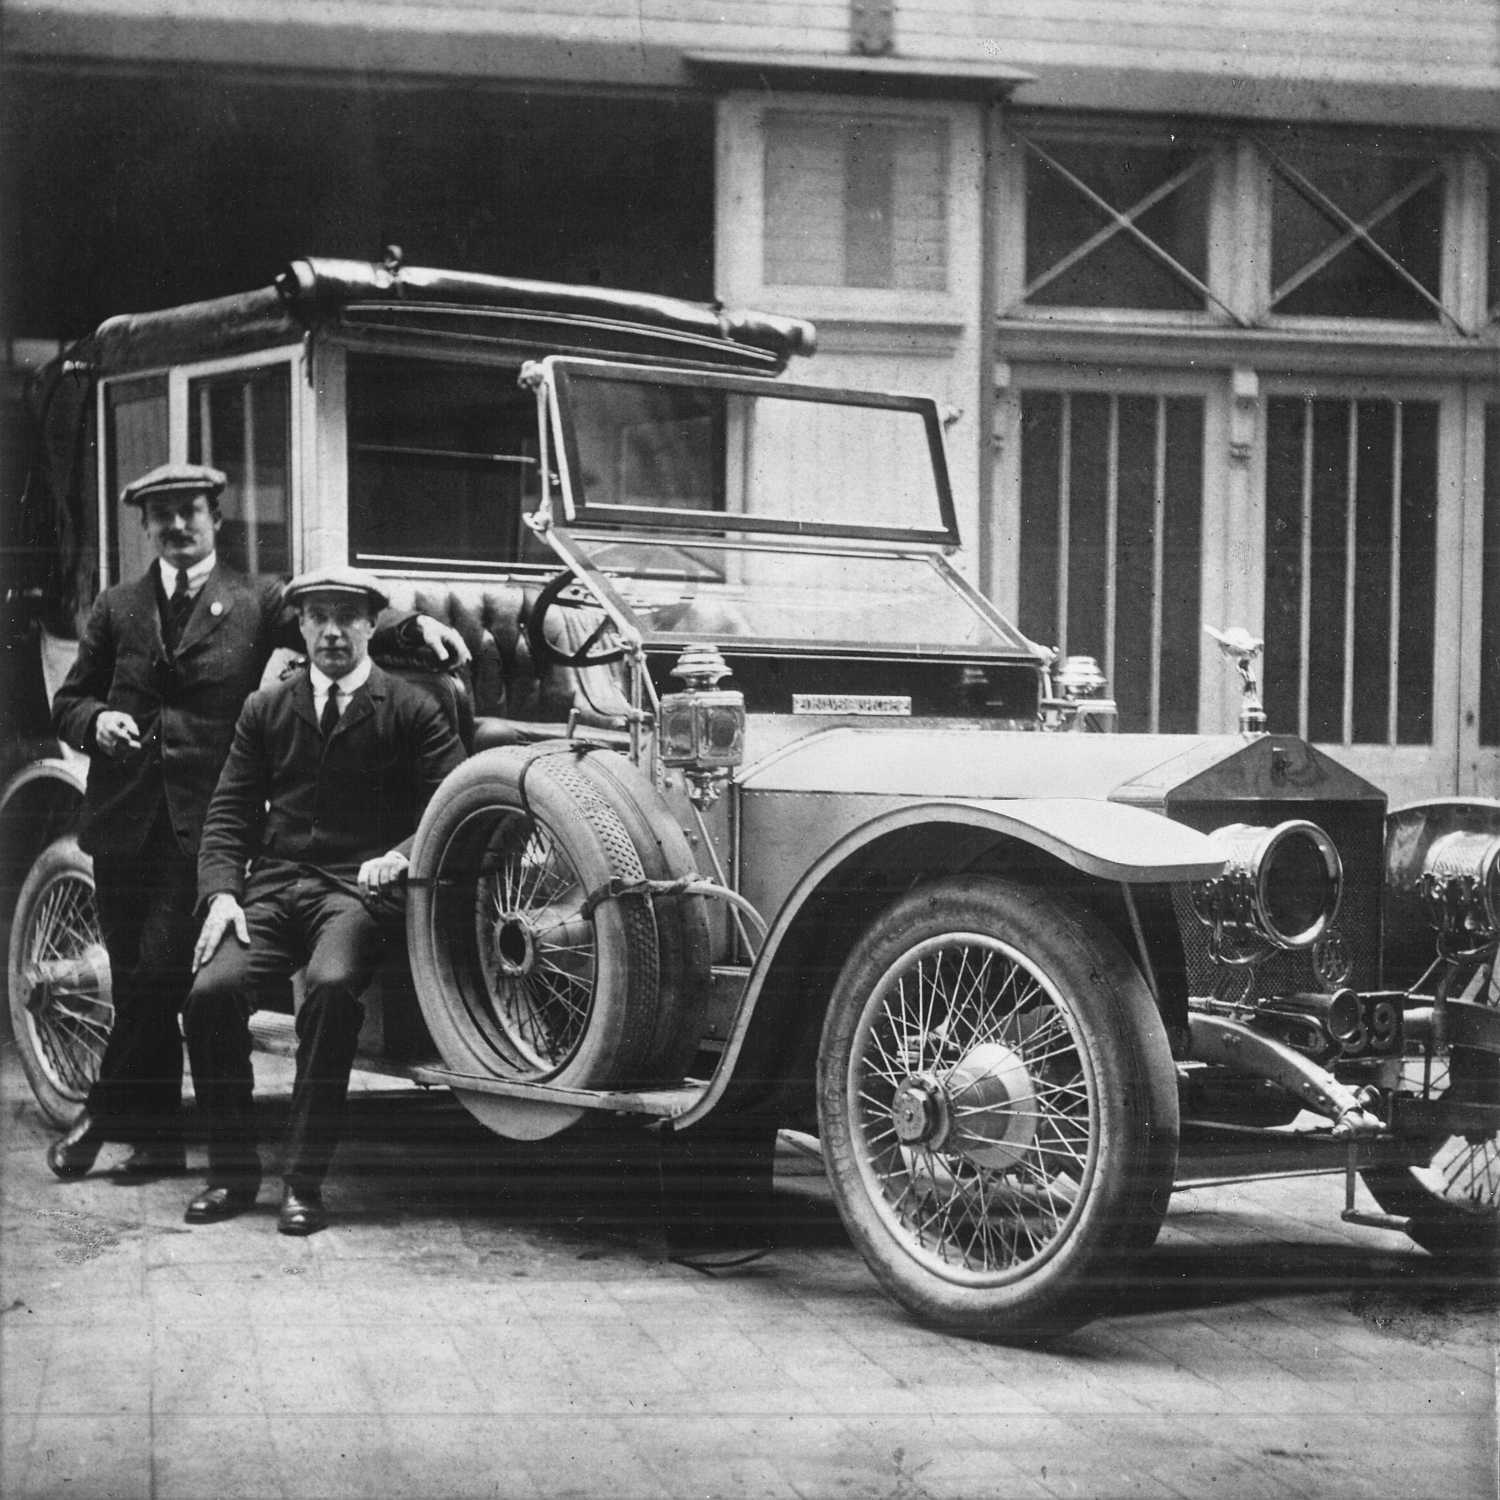 ROLLS-ROYCE 'THE SILVER SPECTRE' (CHASSIS 1601, 1910)